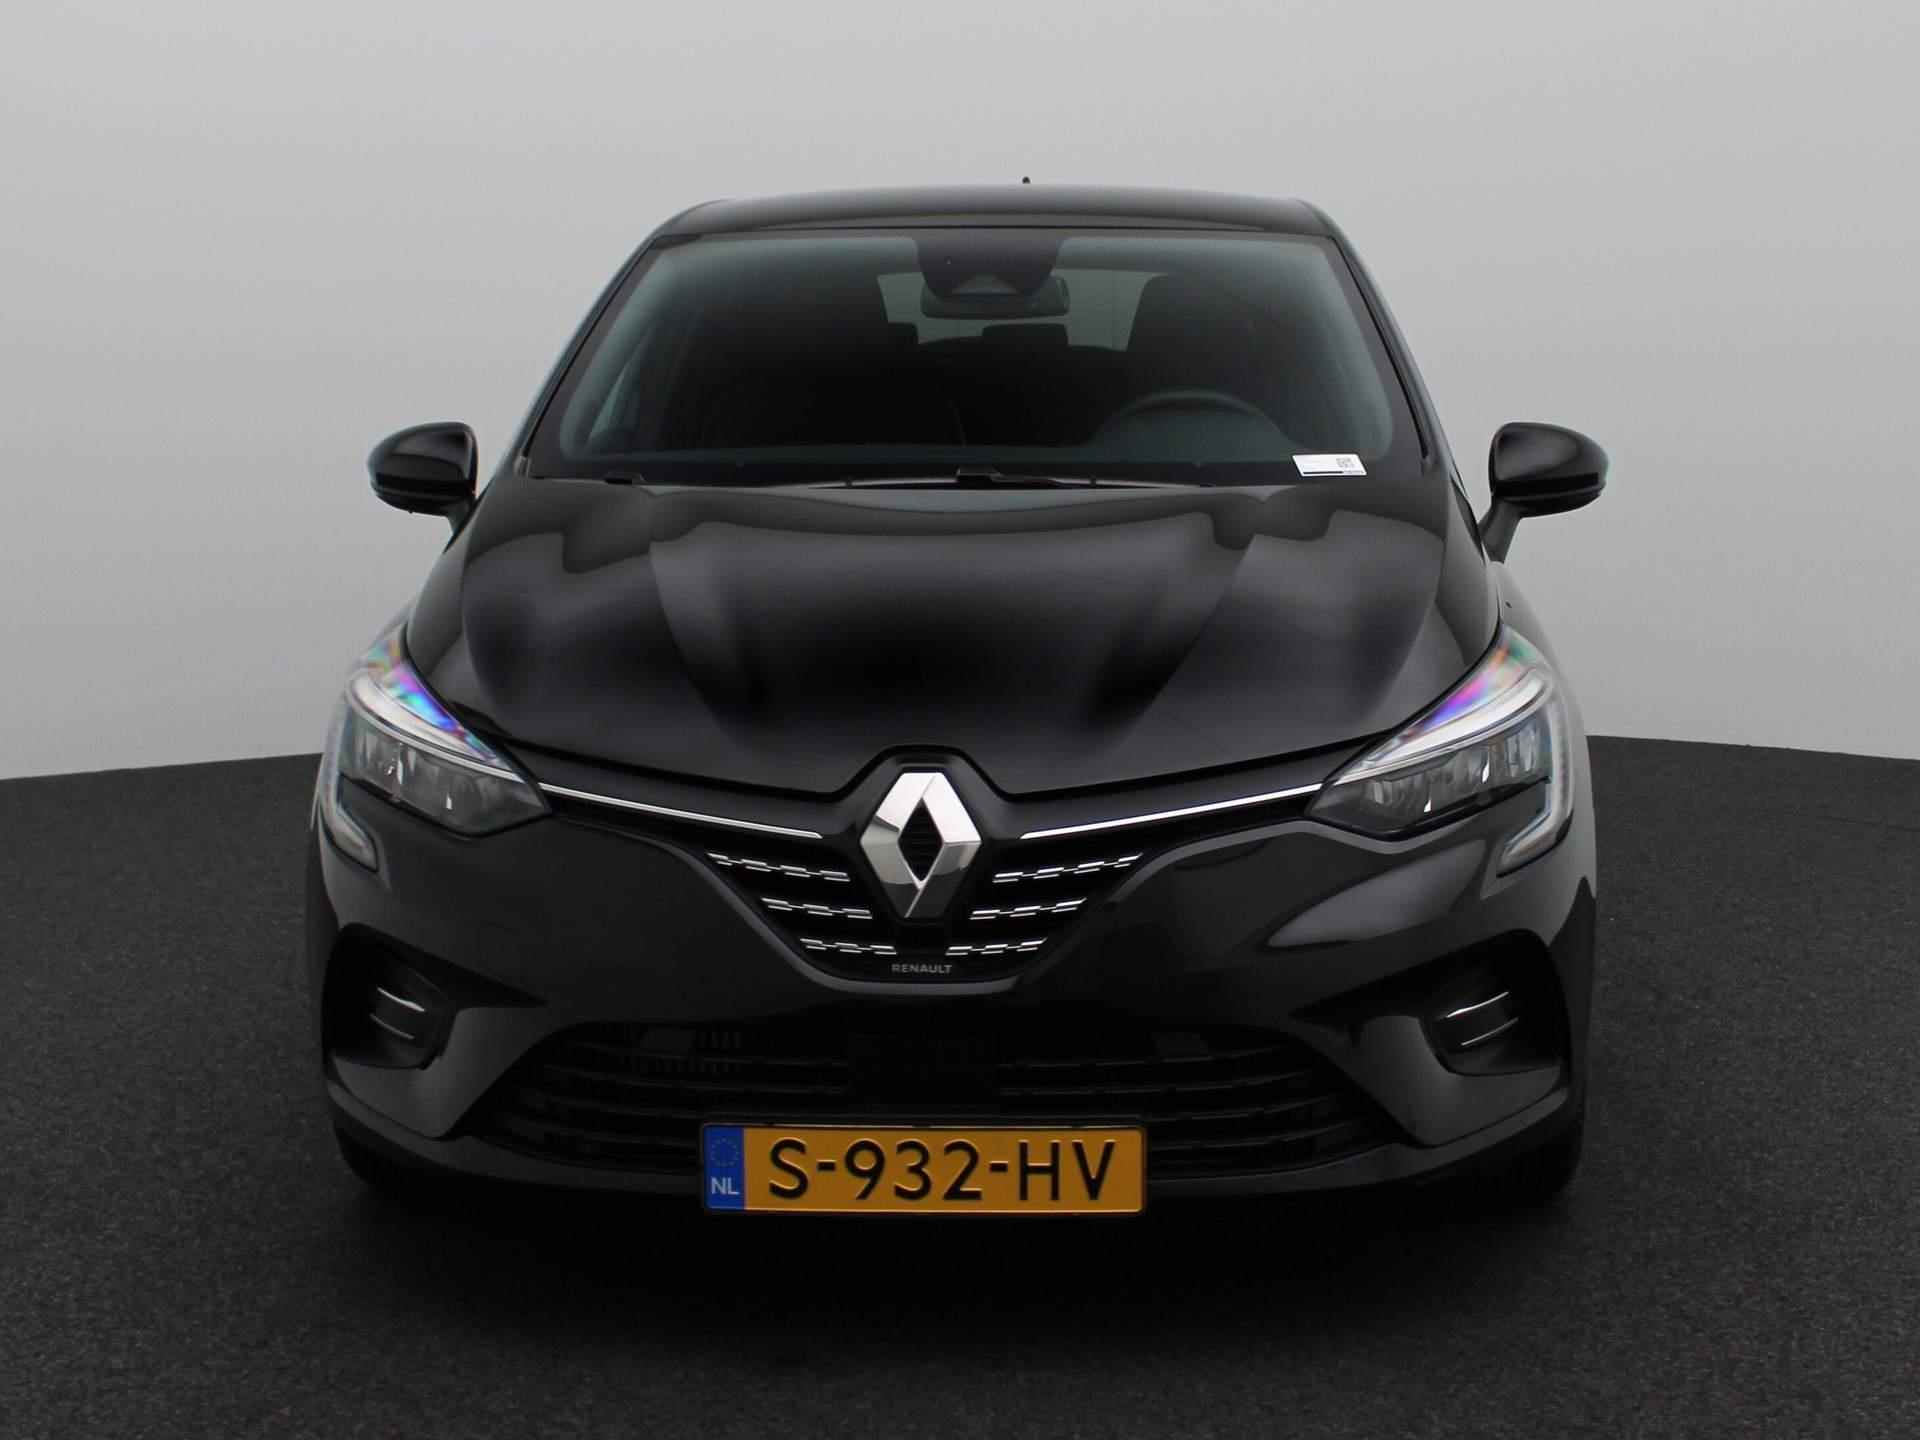 Renault Clio 1.0 TCe 90 Techno | Camera | PDC Voor+Achter | Climate Control | Multi-Sense | Full-Map Navigatie | LED Pure Vision | Privacy Glass | 16" LMV - 3/39